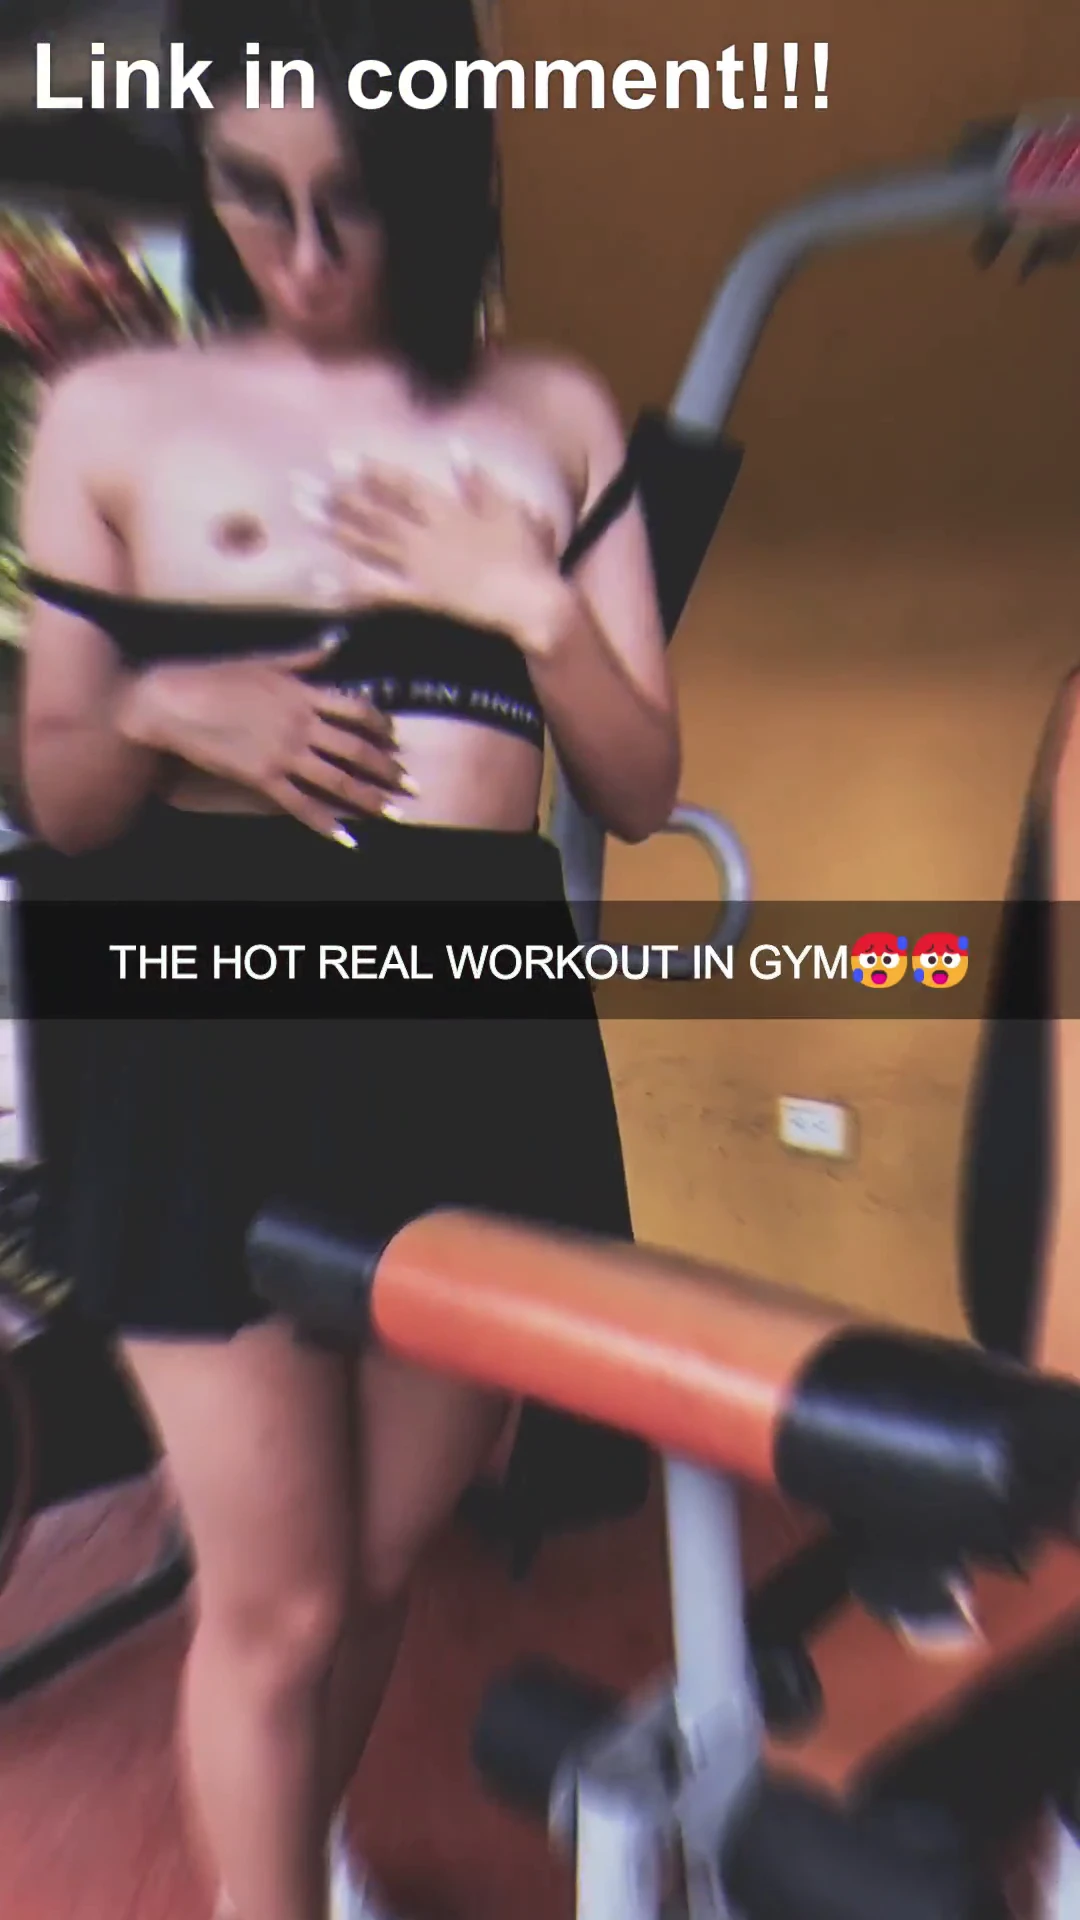 THE HOTTY REAL WORKOUT IN GYM🚫